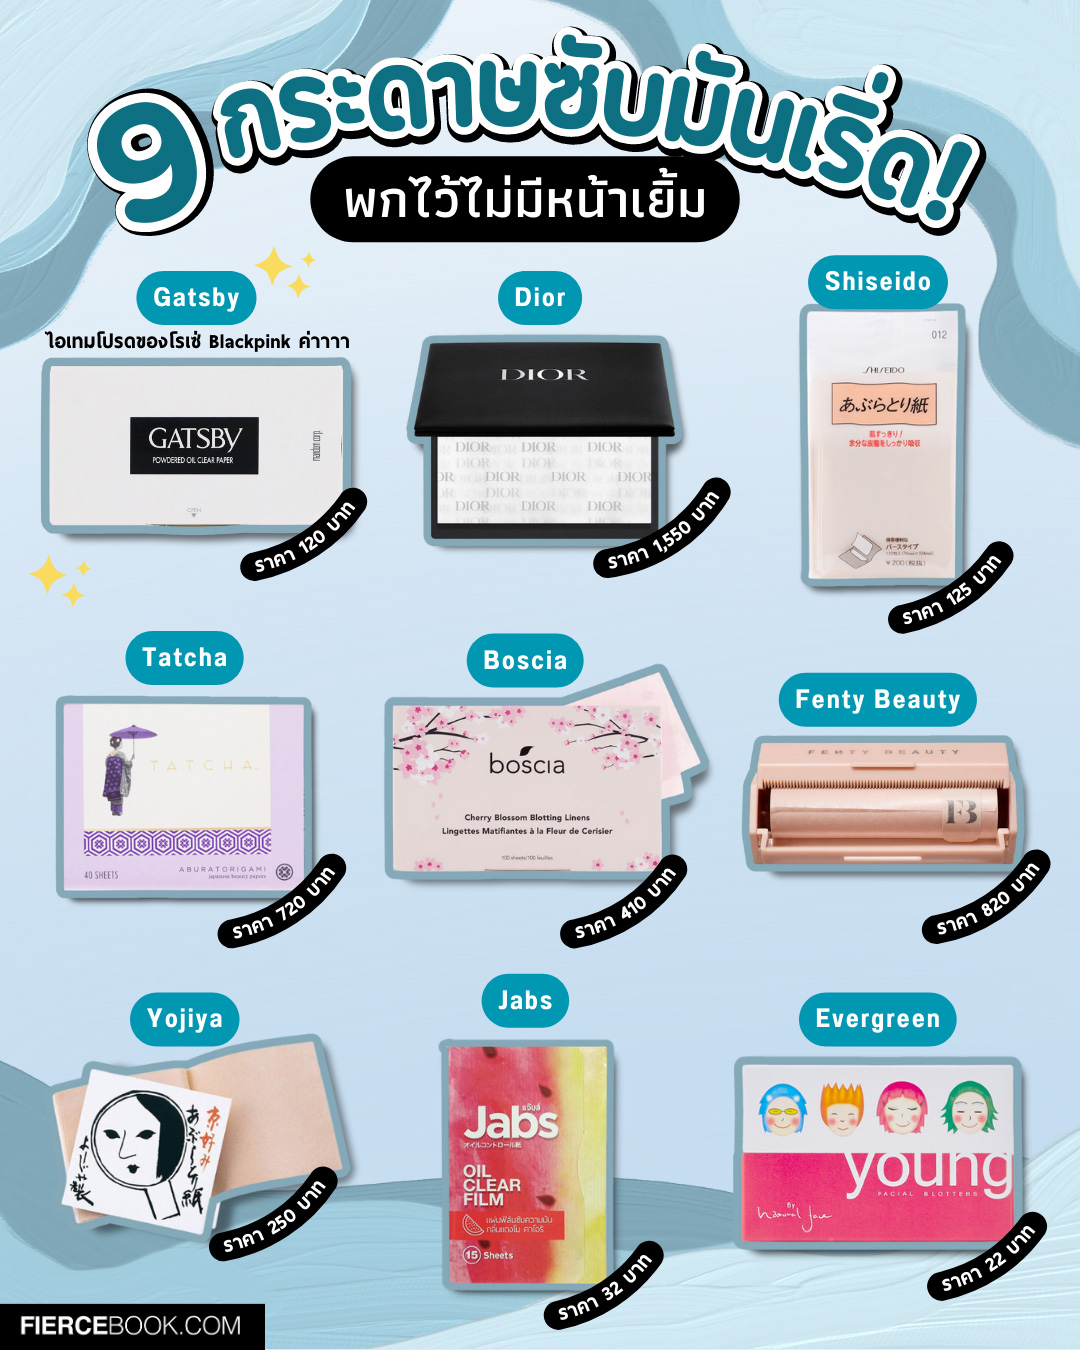 Beauty Items, กระดาษซับมัน, โรเซ่, Rose, Blackpink, พกติดกระเป๋า, Gatsby Powdered Oil Clear Paper, Dior Skin Mattifying Papers, Shiseido Oil Remover Sheet, Tatcha Aburatorigami Japanese Blotting Papers, Boscia Cherry Blossom Blotting Linens, Fenty Beauty Invisimatte Blotting Paper, Yojiya Oil-blotting Facial Paper, Jabs Oil Clear Film, Evergreen Young Natural Face Oil Blotting Paper